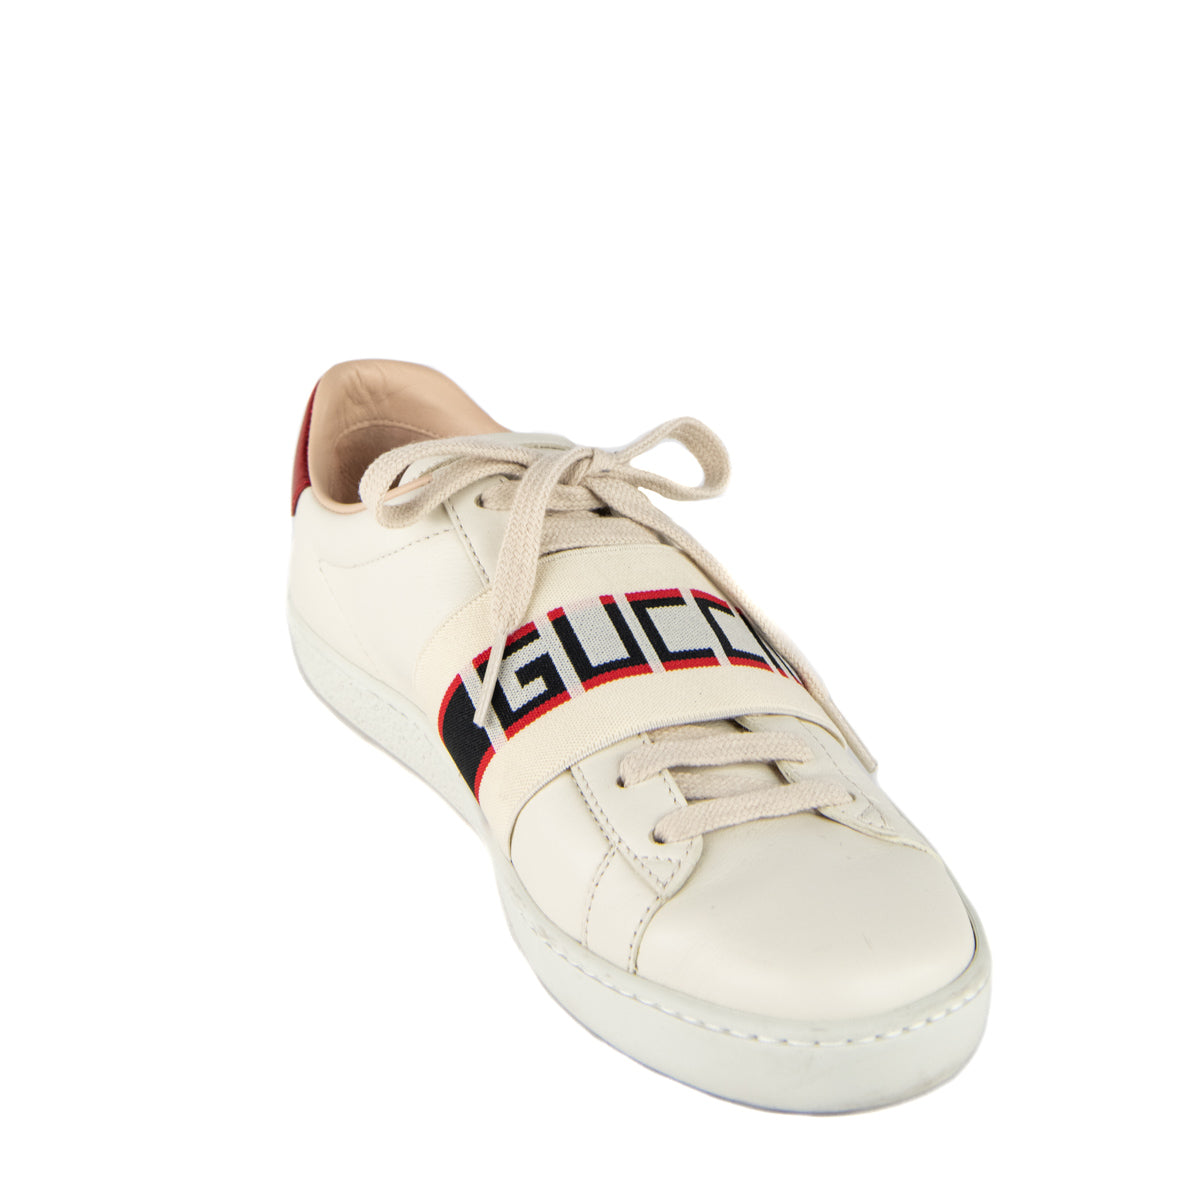 gucci sneakers size 6